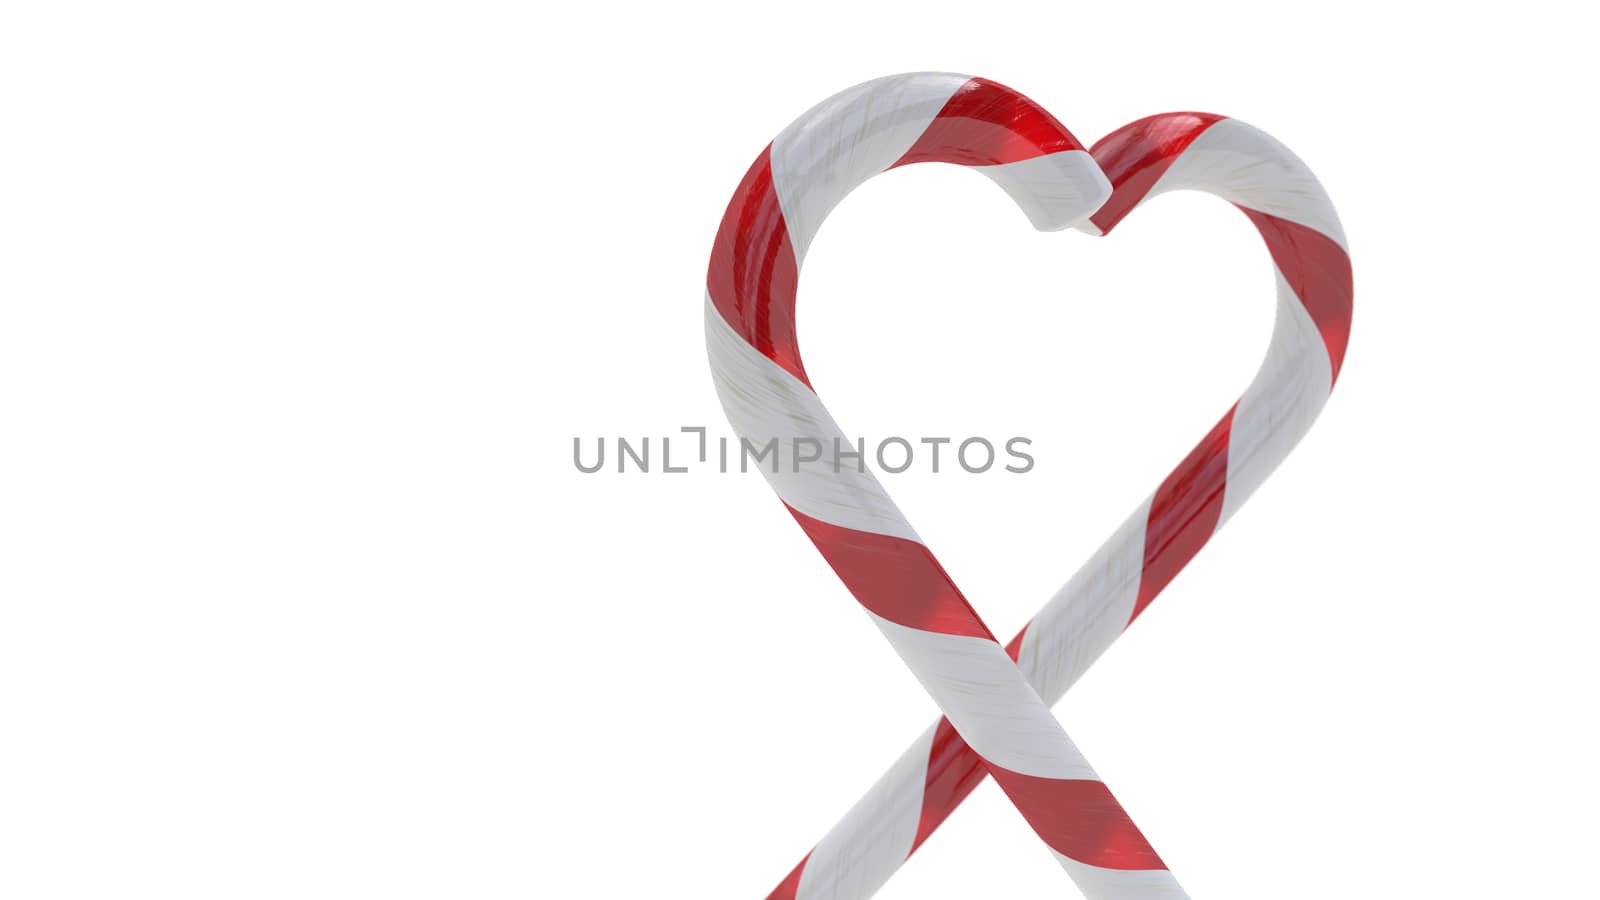 Candy Canes arranged to look like a heart on White Background, Christmas Decoration 